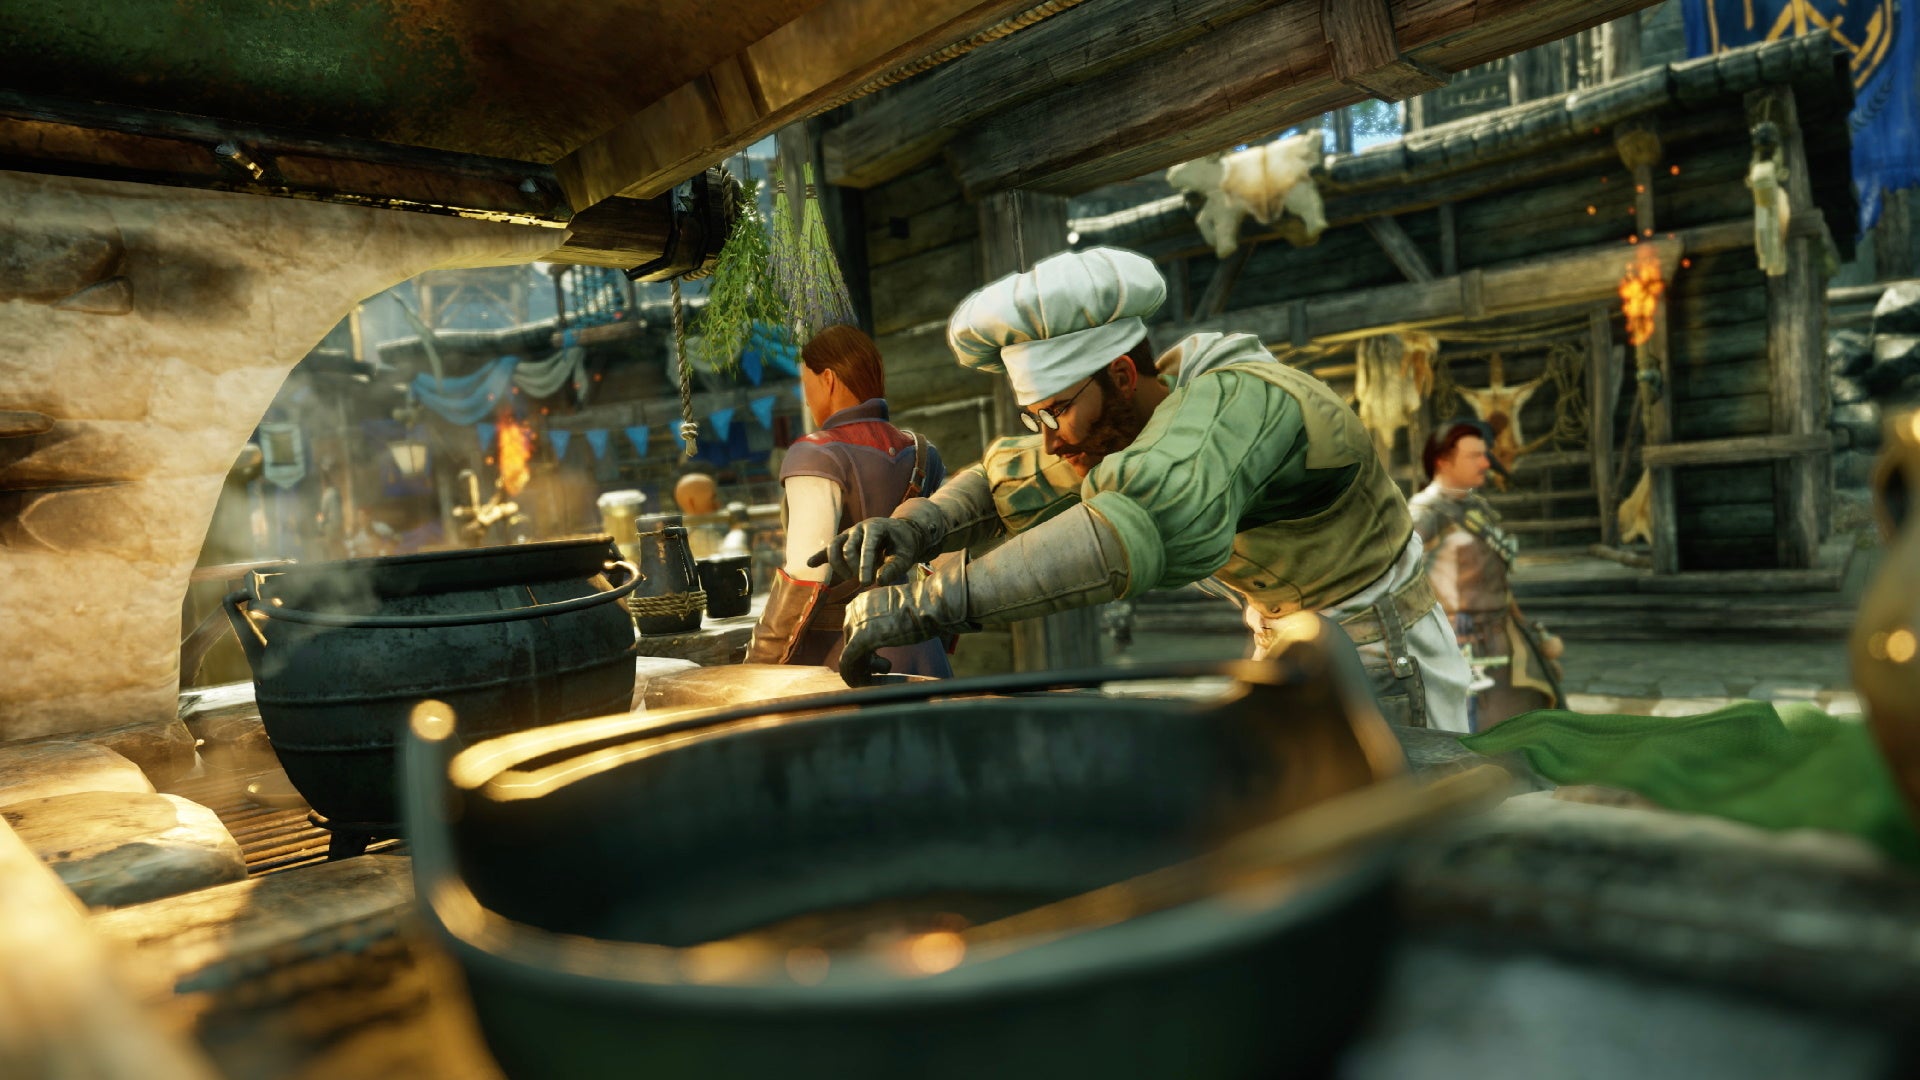 An image from New World which shows a chef cooking up something nice under the cover of his stall.